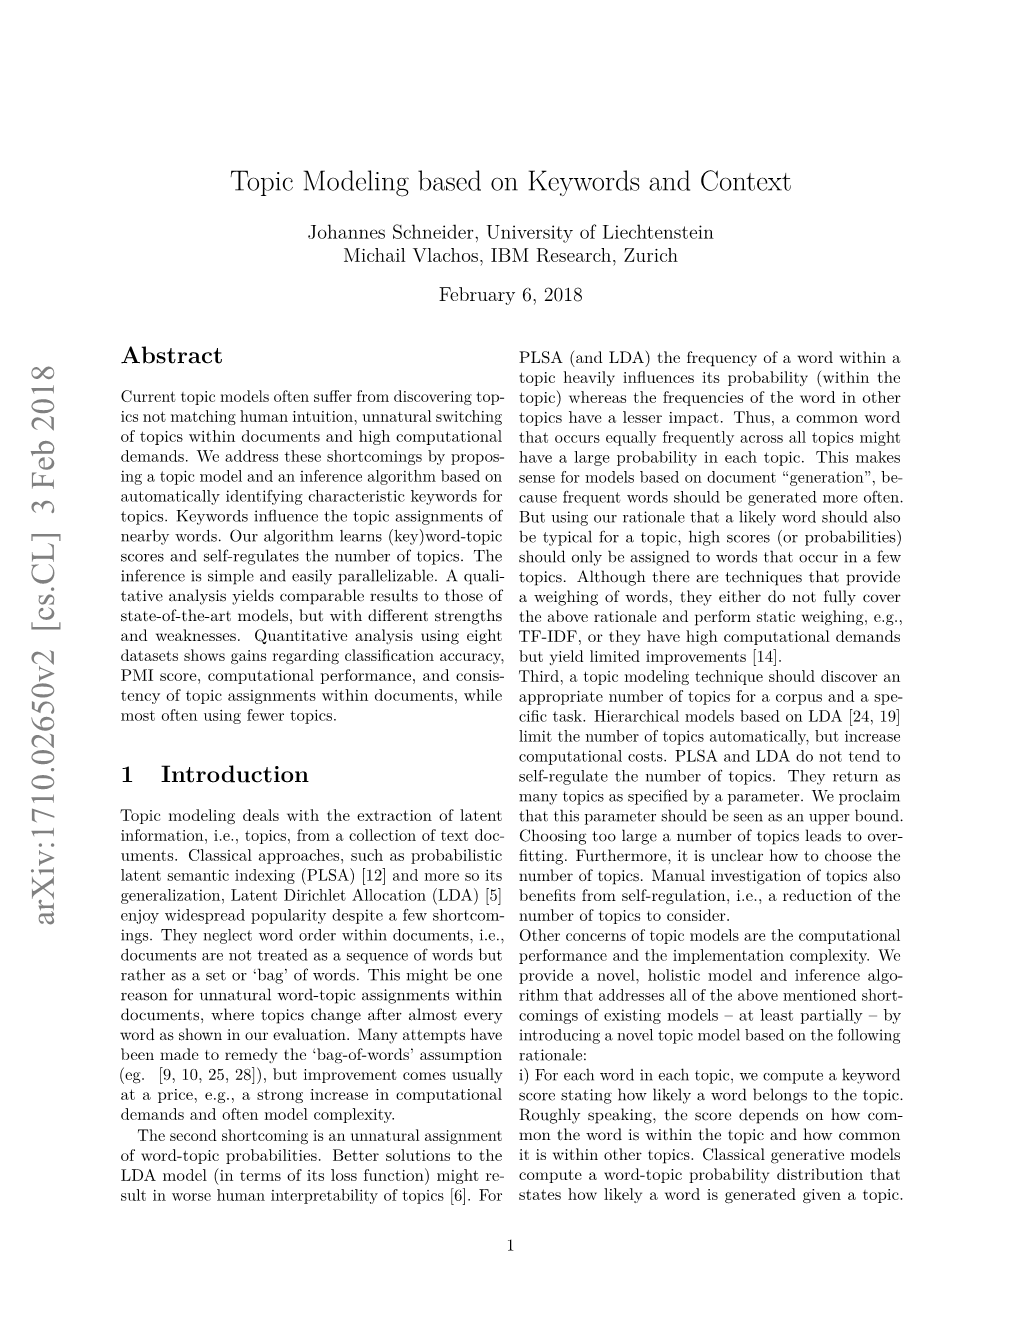 Topic Modeling Based on Keywords and Context